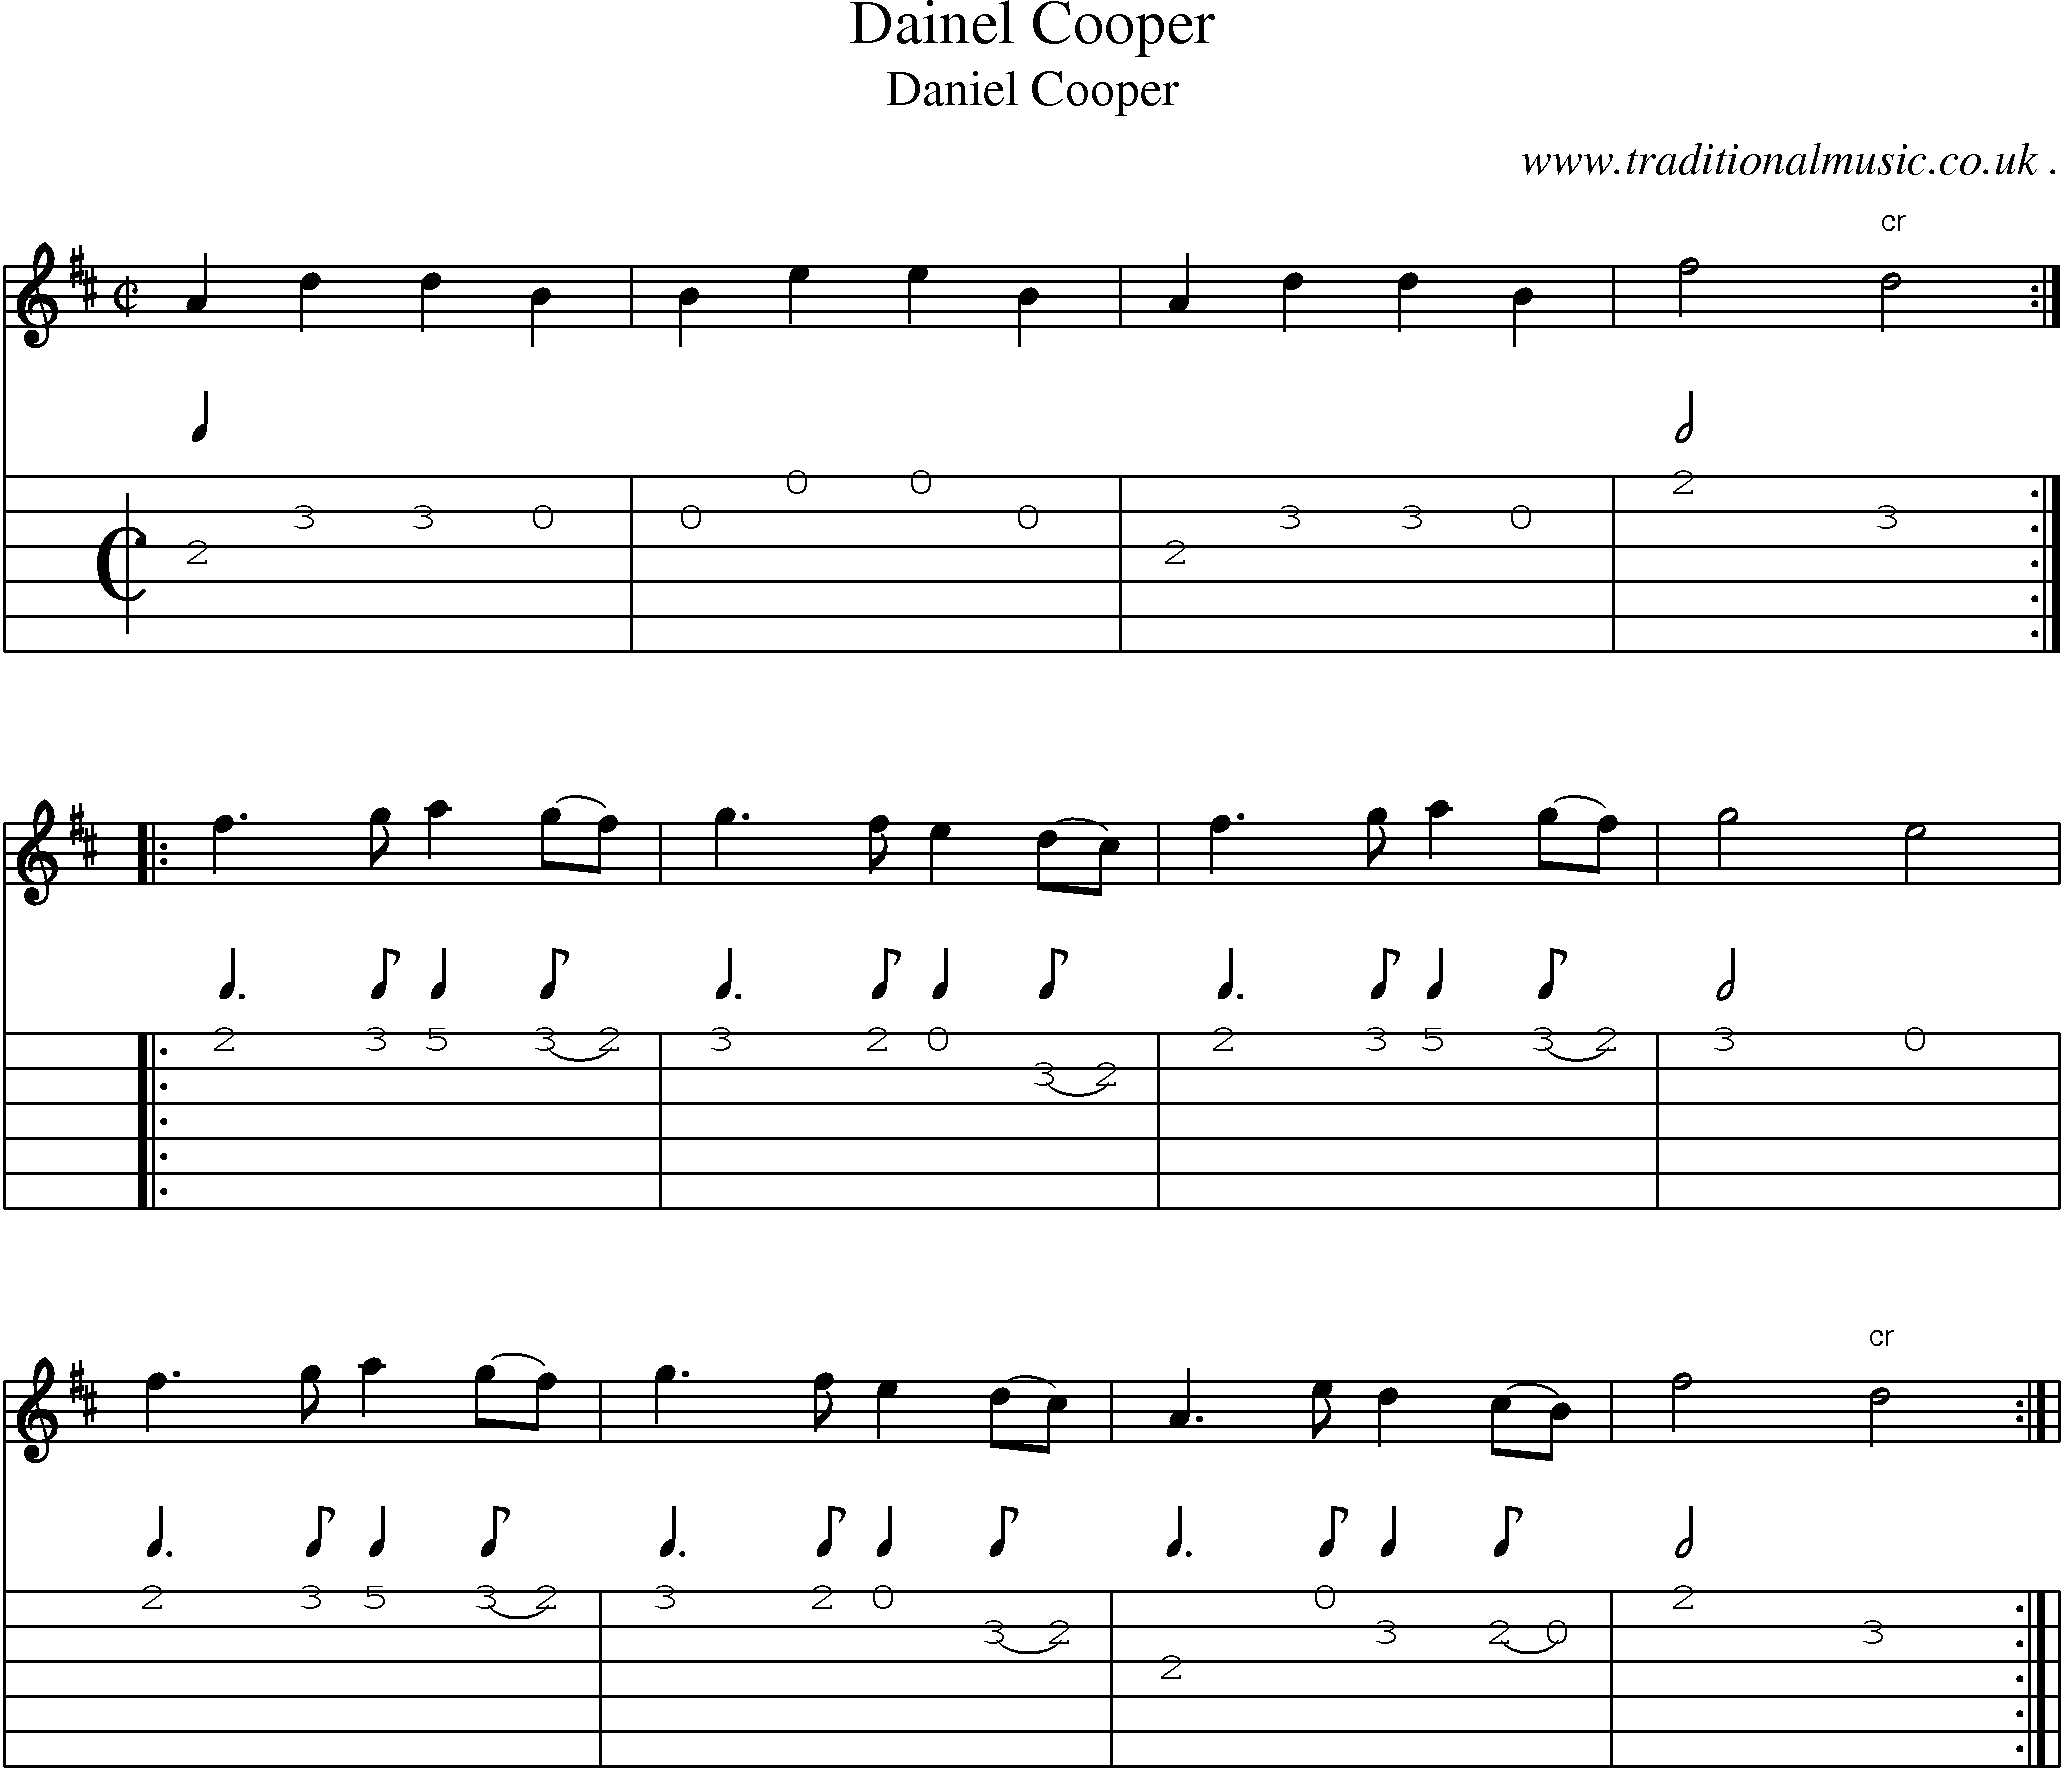 Sheet-Music and Guitar Tabs for Dainel Cooper